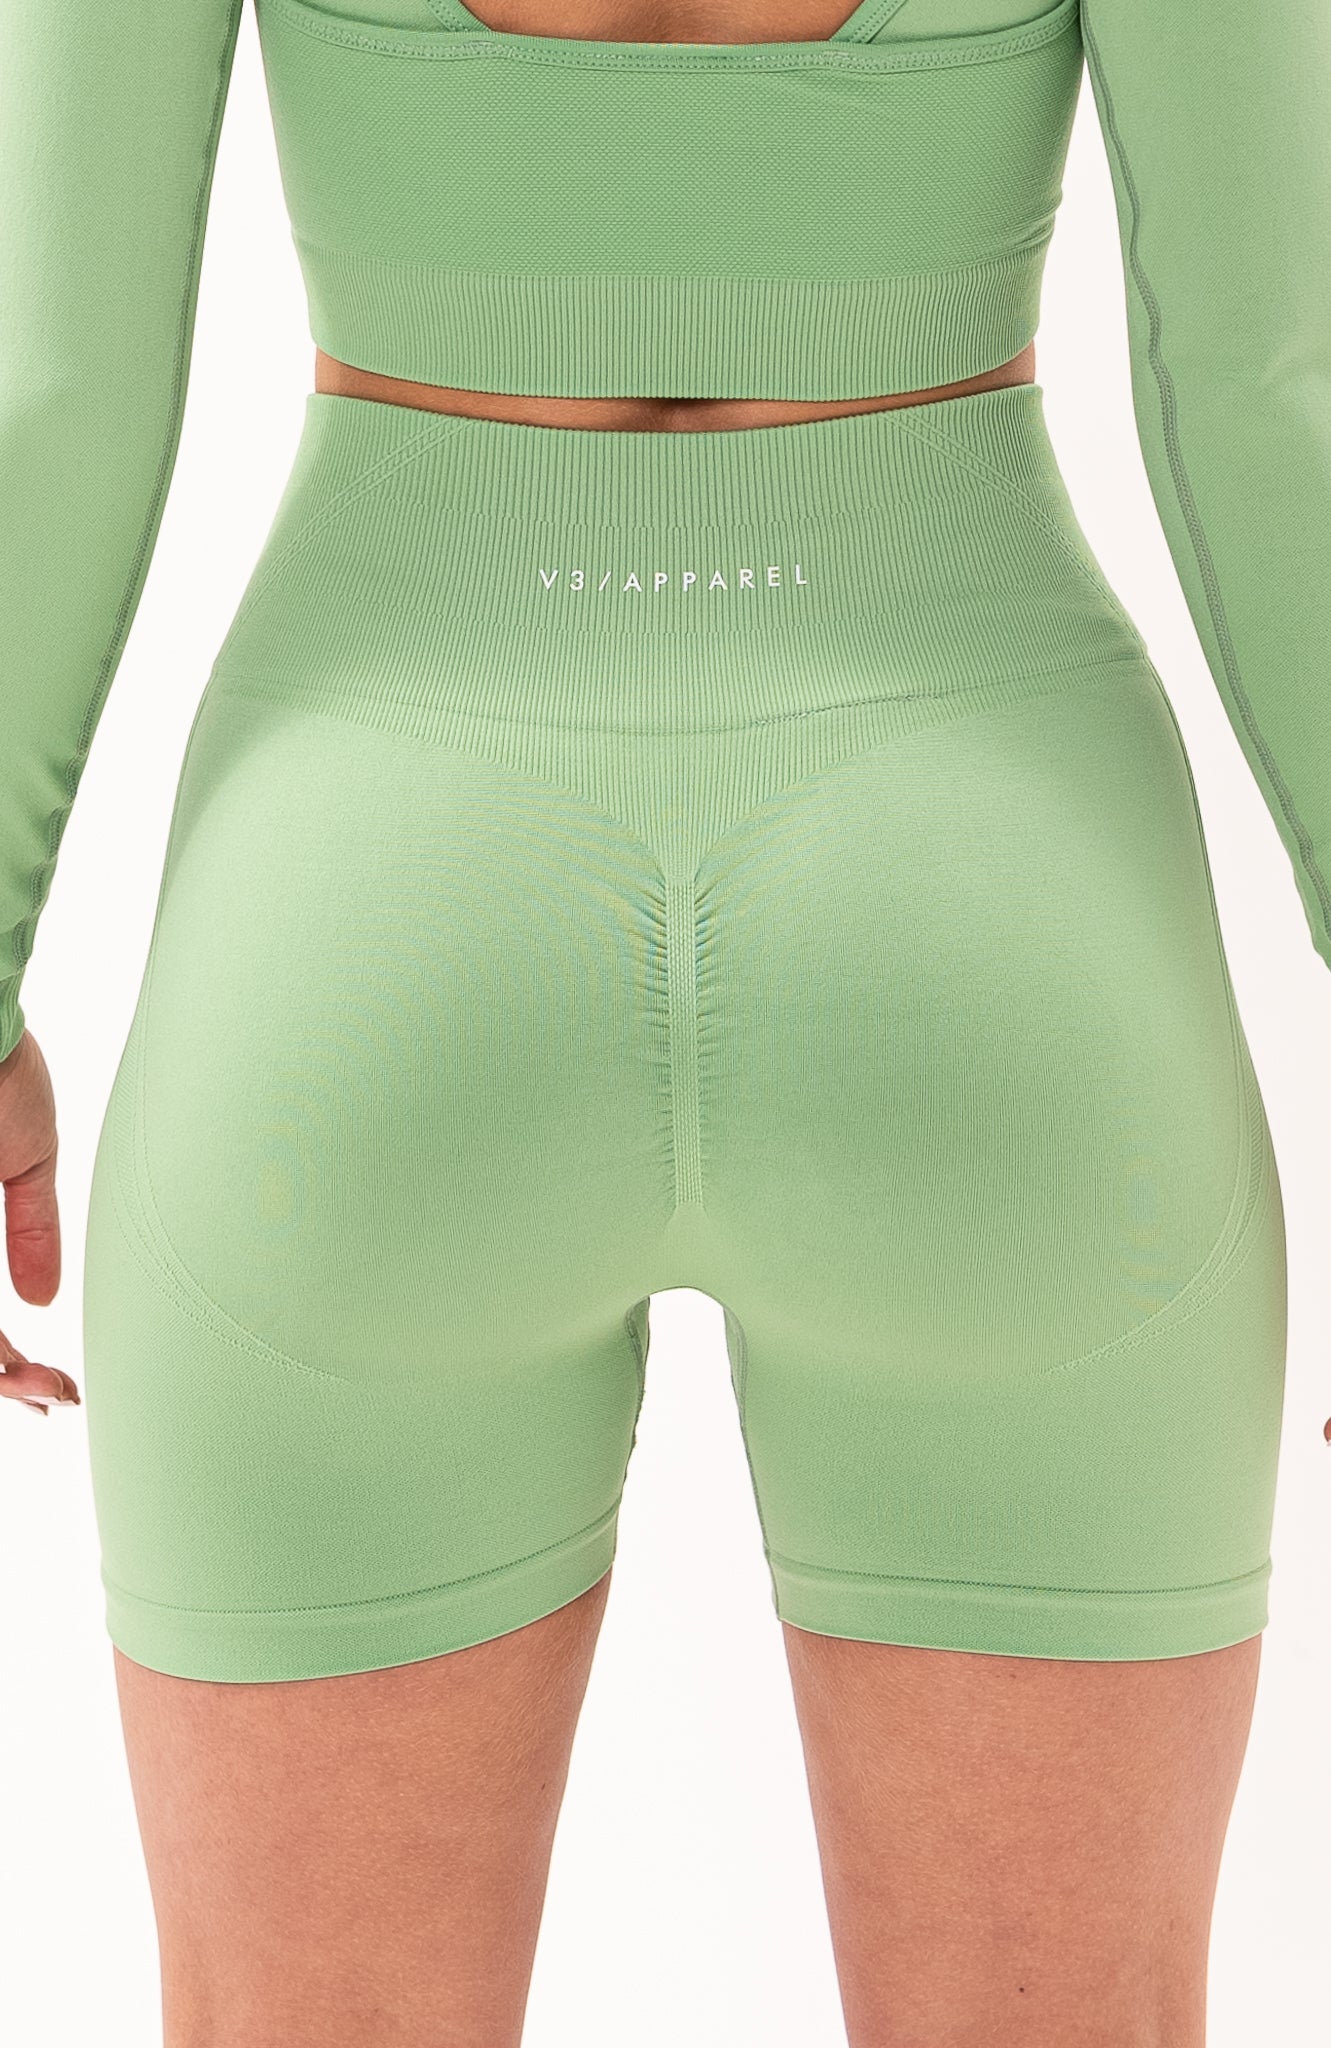 redbaysand Women's Tempo seamless scrunch bum shaping high waisted cycle shorts in mint green – Squat proof 5 inch leg gym shorts for workouts training, Running, yoga, bodybuilding and bikini fitness.